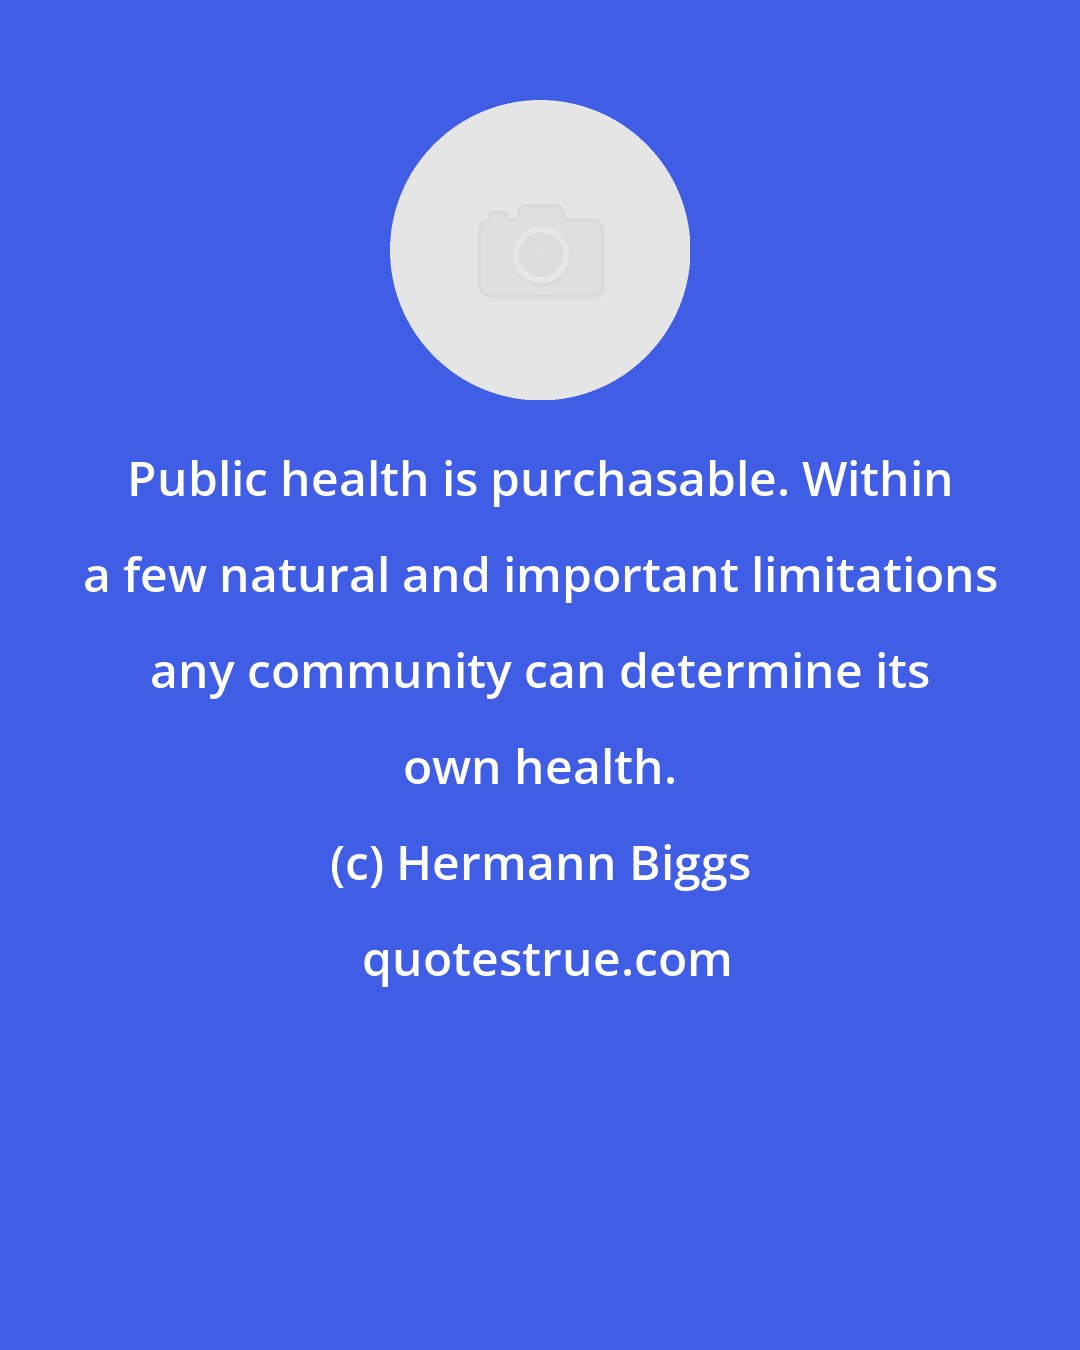 Hermann Biggs: Public health is purchasable. Within a few natural and important limitations any community can determine its own health.